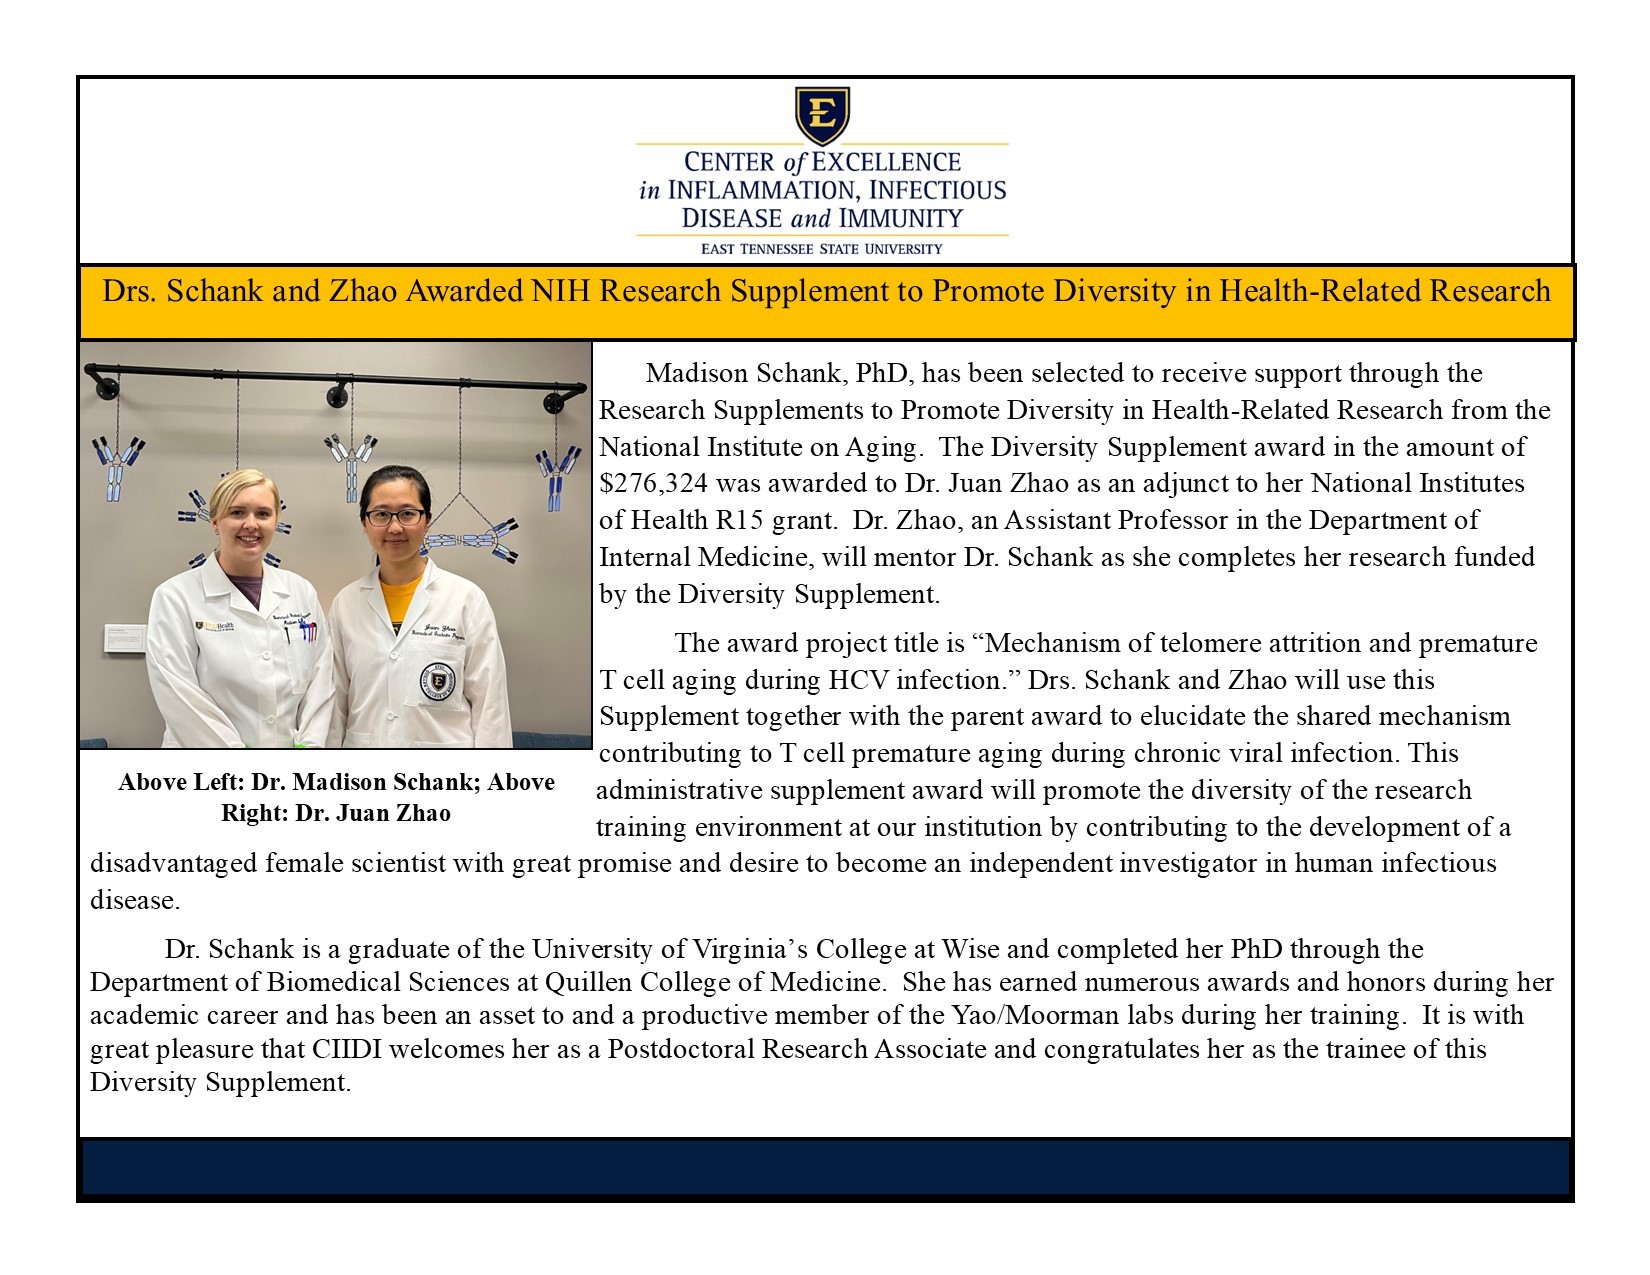 image for Drs. Schank and Zhao Awarded NIH Research Supplement 